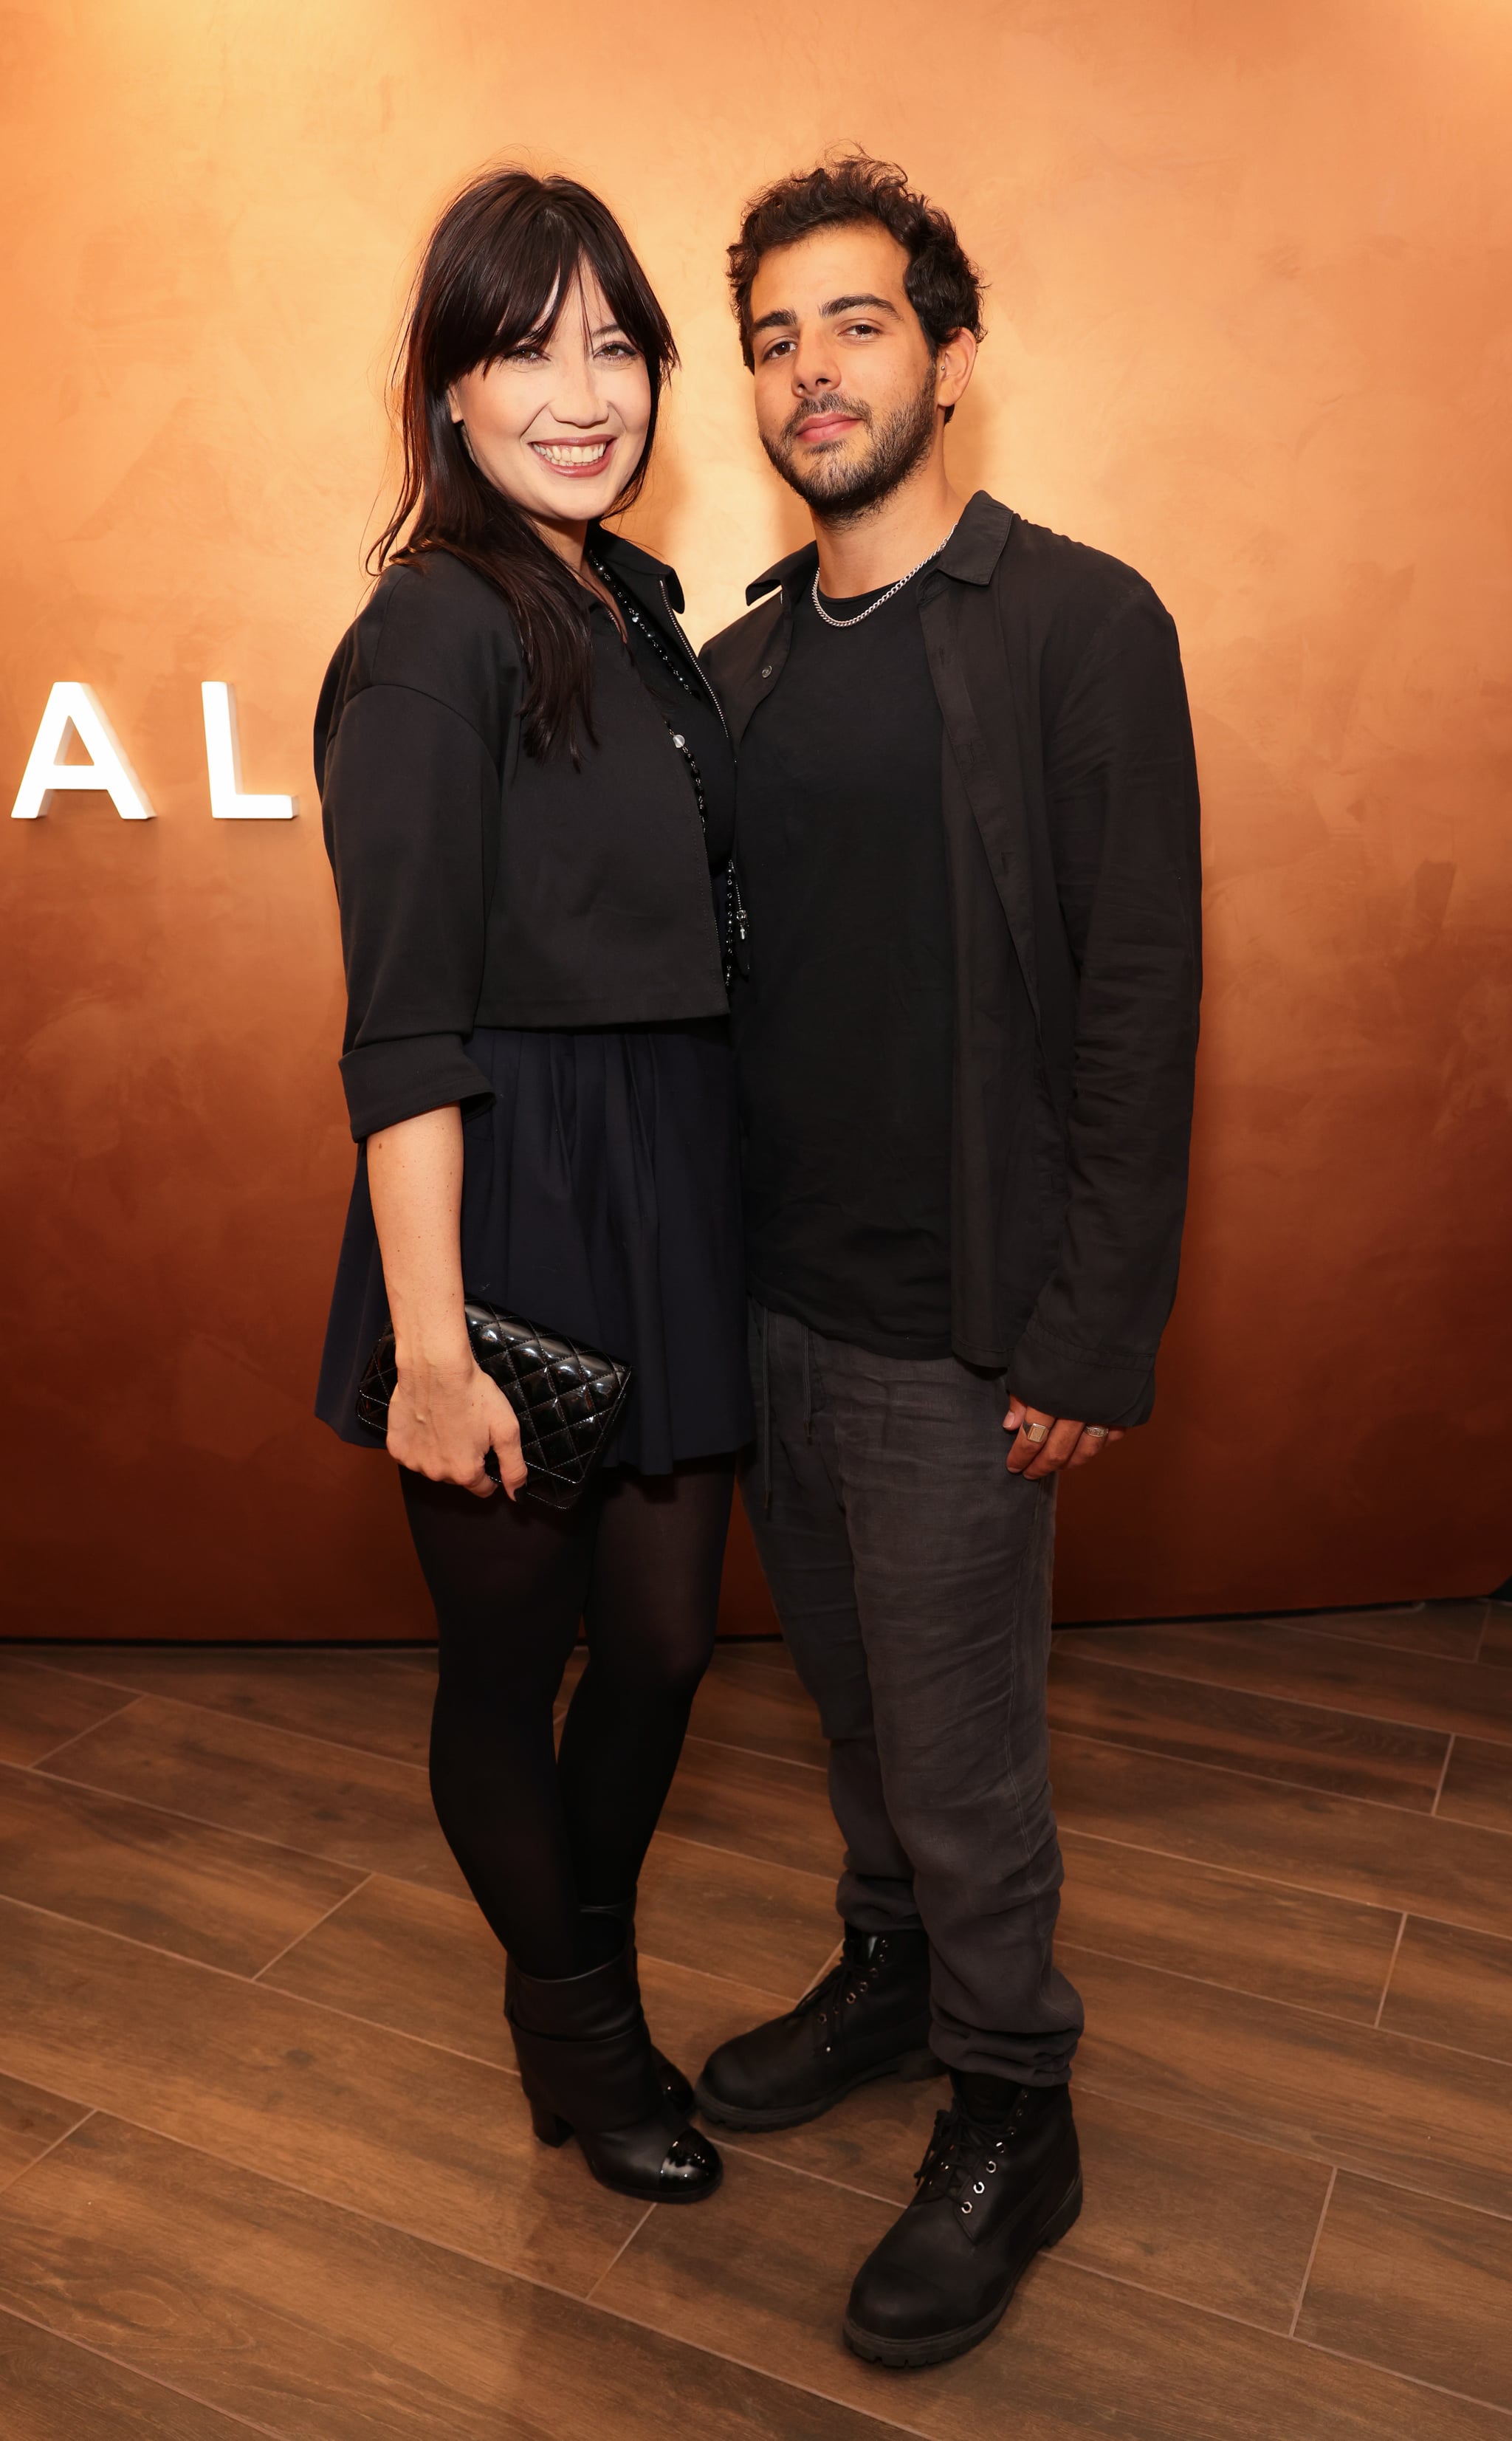 LONDON, ENGLAND - SEPTEMBER 07: Daisy Lowe (L) and Jordan Saul attend the Dr. Vali 360 Experiential Center launch at Selfridges on September 07, 2022 in London, England. (Photo by David M. Benett/Dave Benett/Getty Images for Cosmoss)